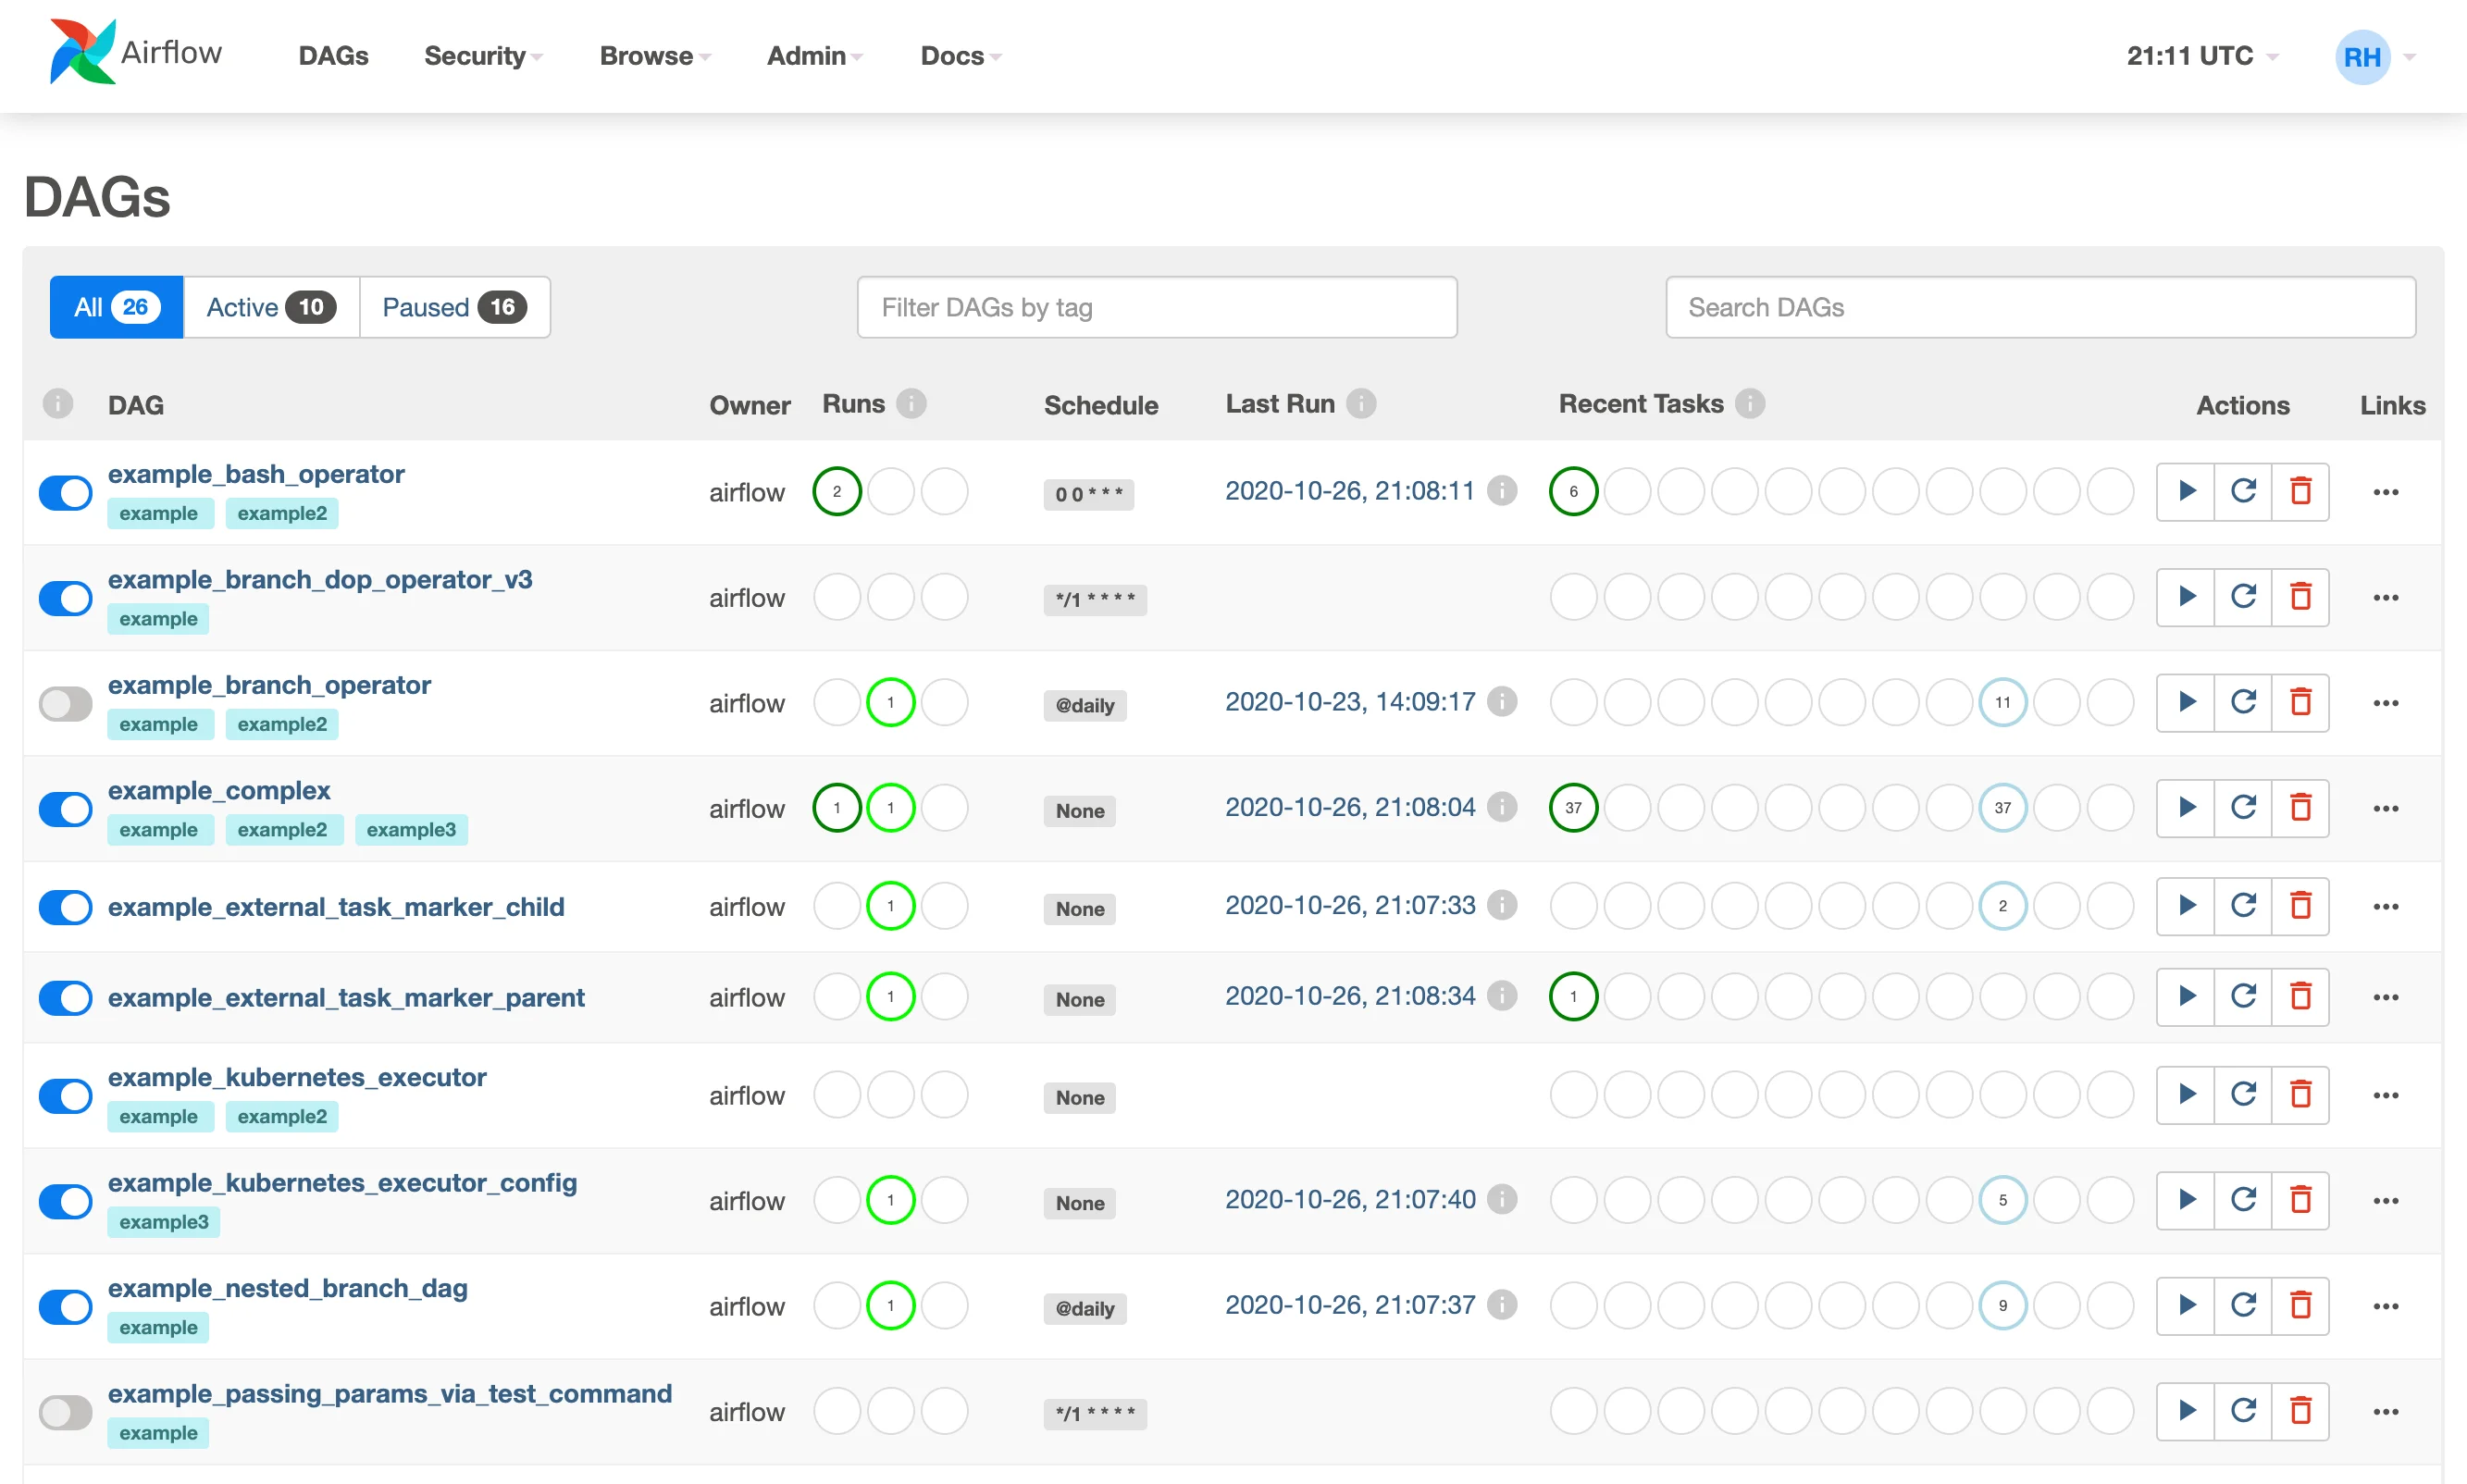 Airflow’s user interface offers a comprehensive view of DAGs and their tasks